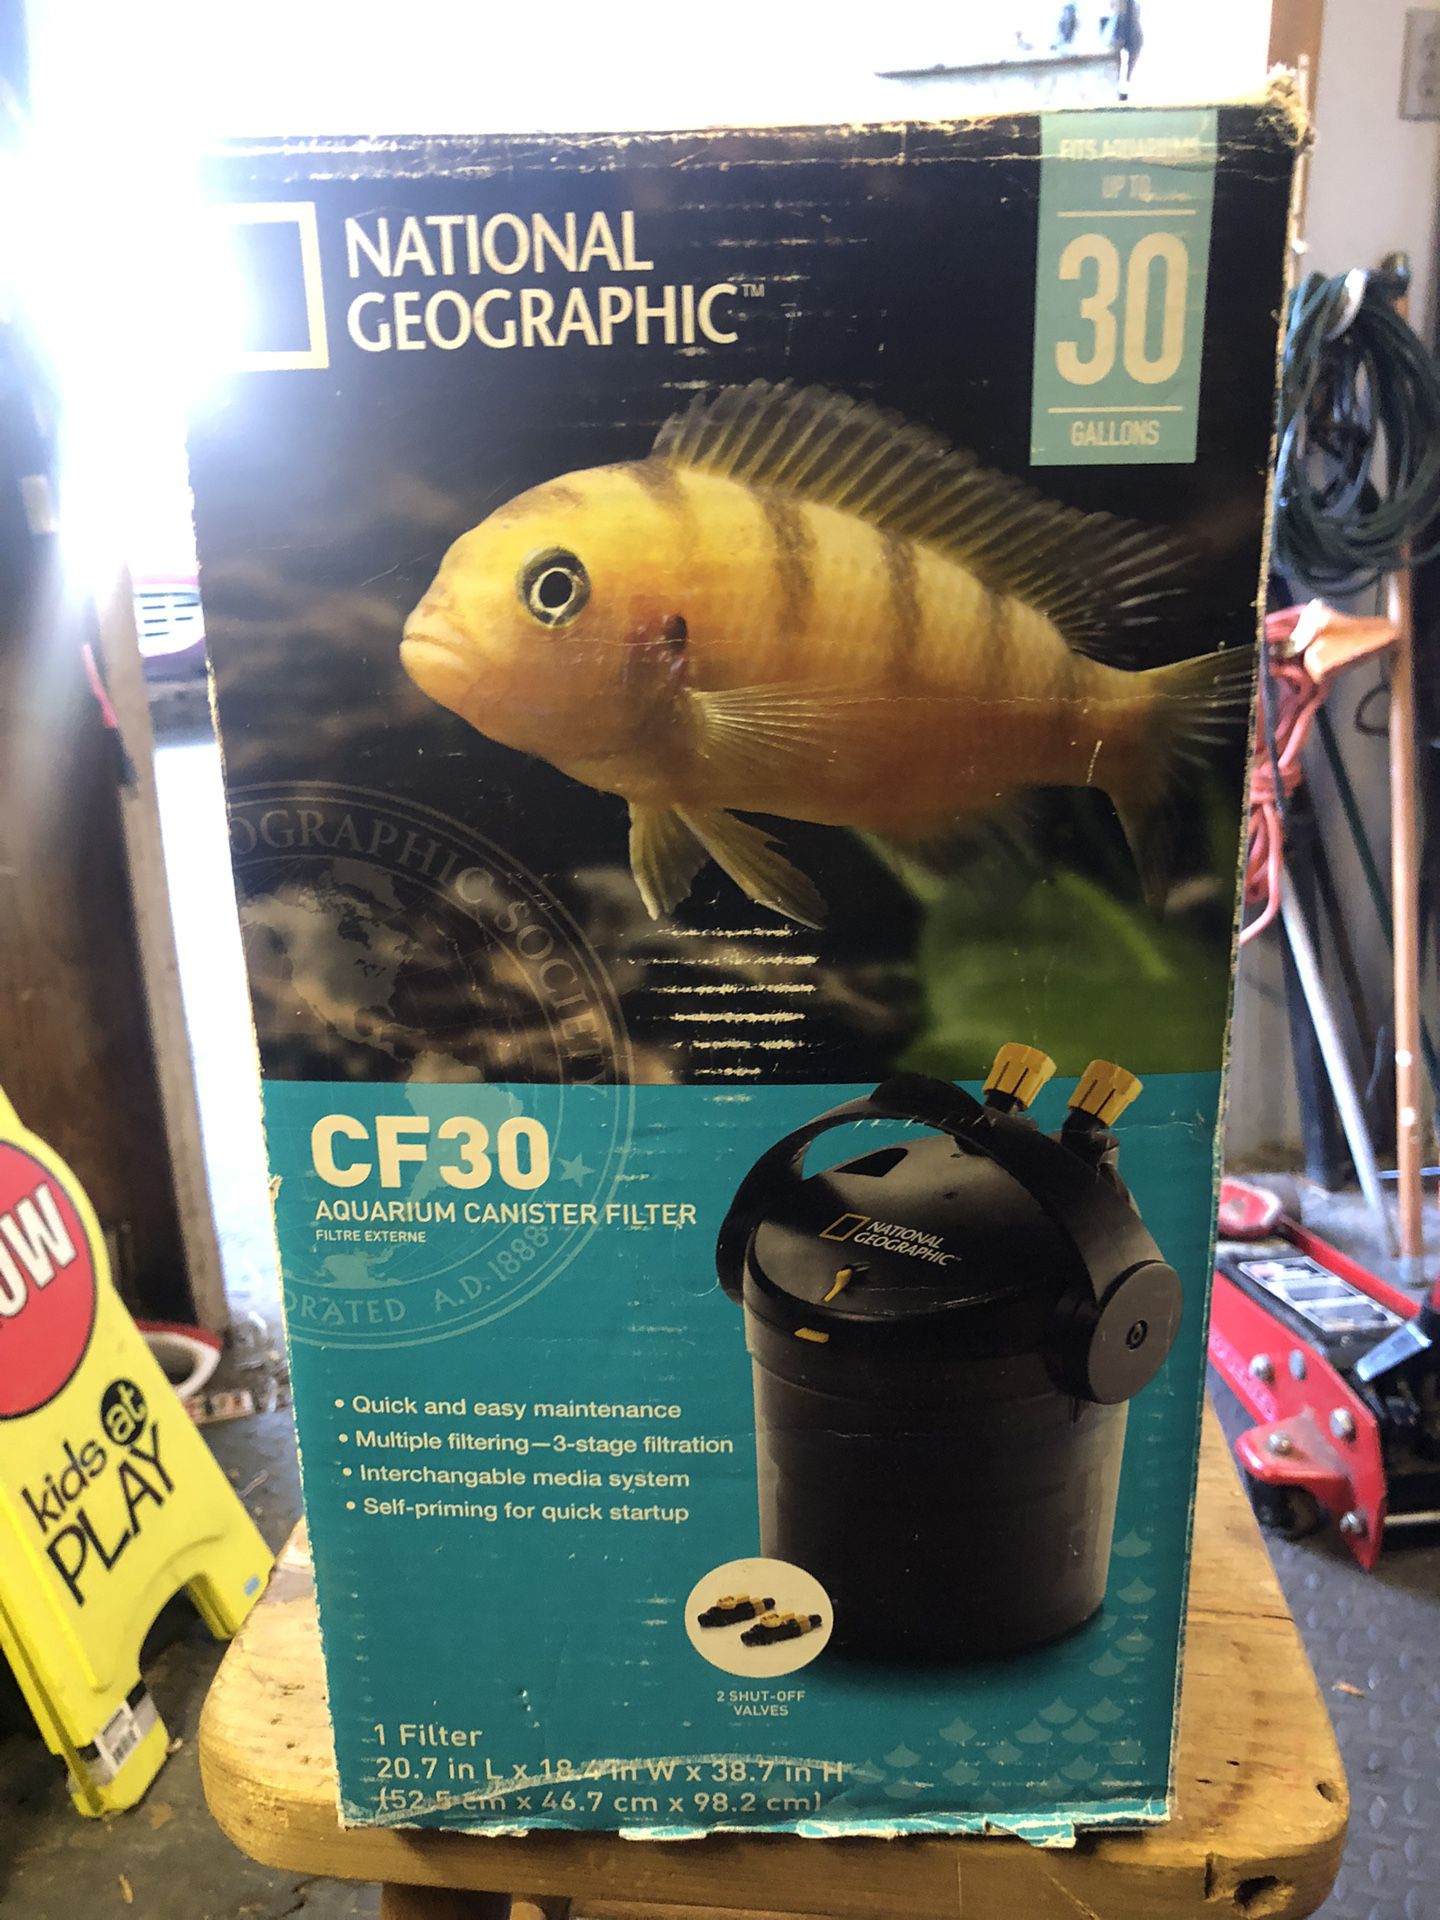 Aquarium 30 Gal. Canister Filter With Extra Filter Media and Filters CF30